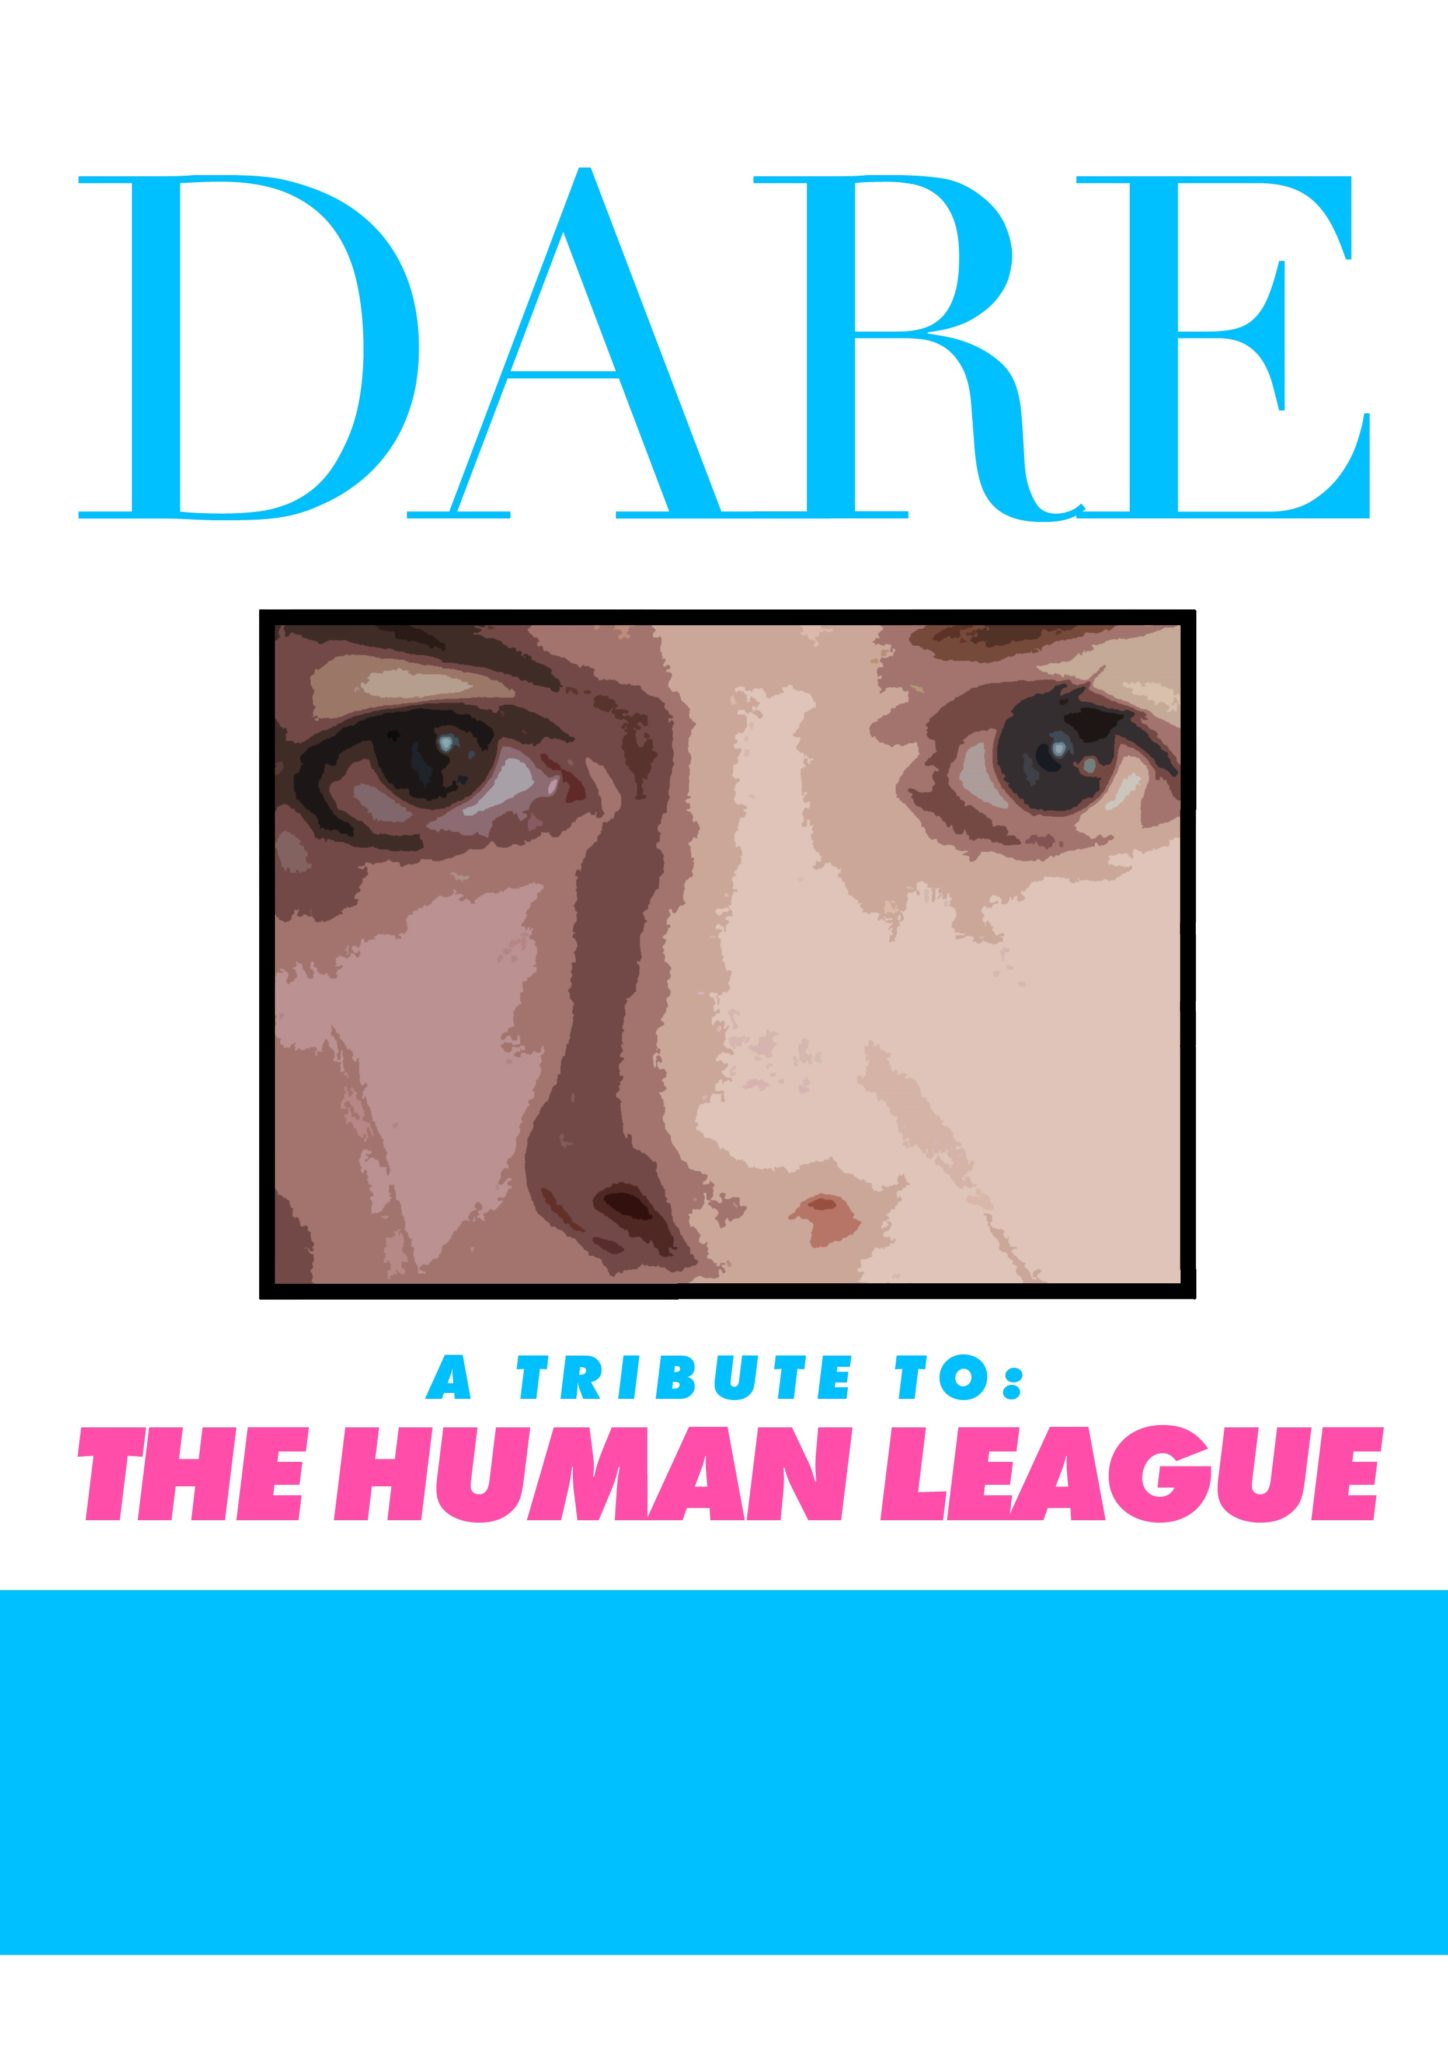 ‘Dare’ to see Human League tribute 🗓